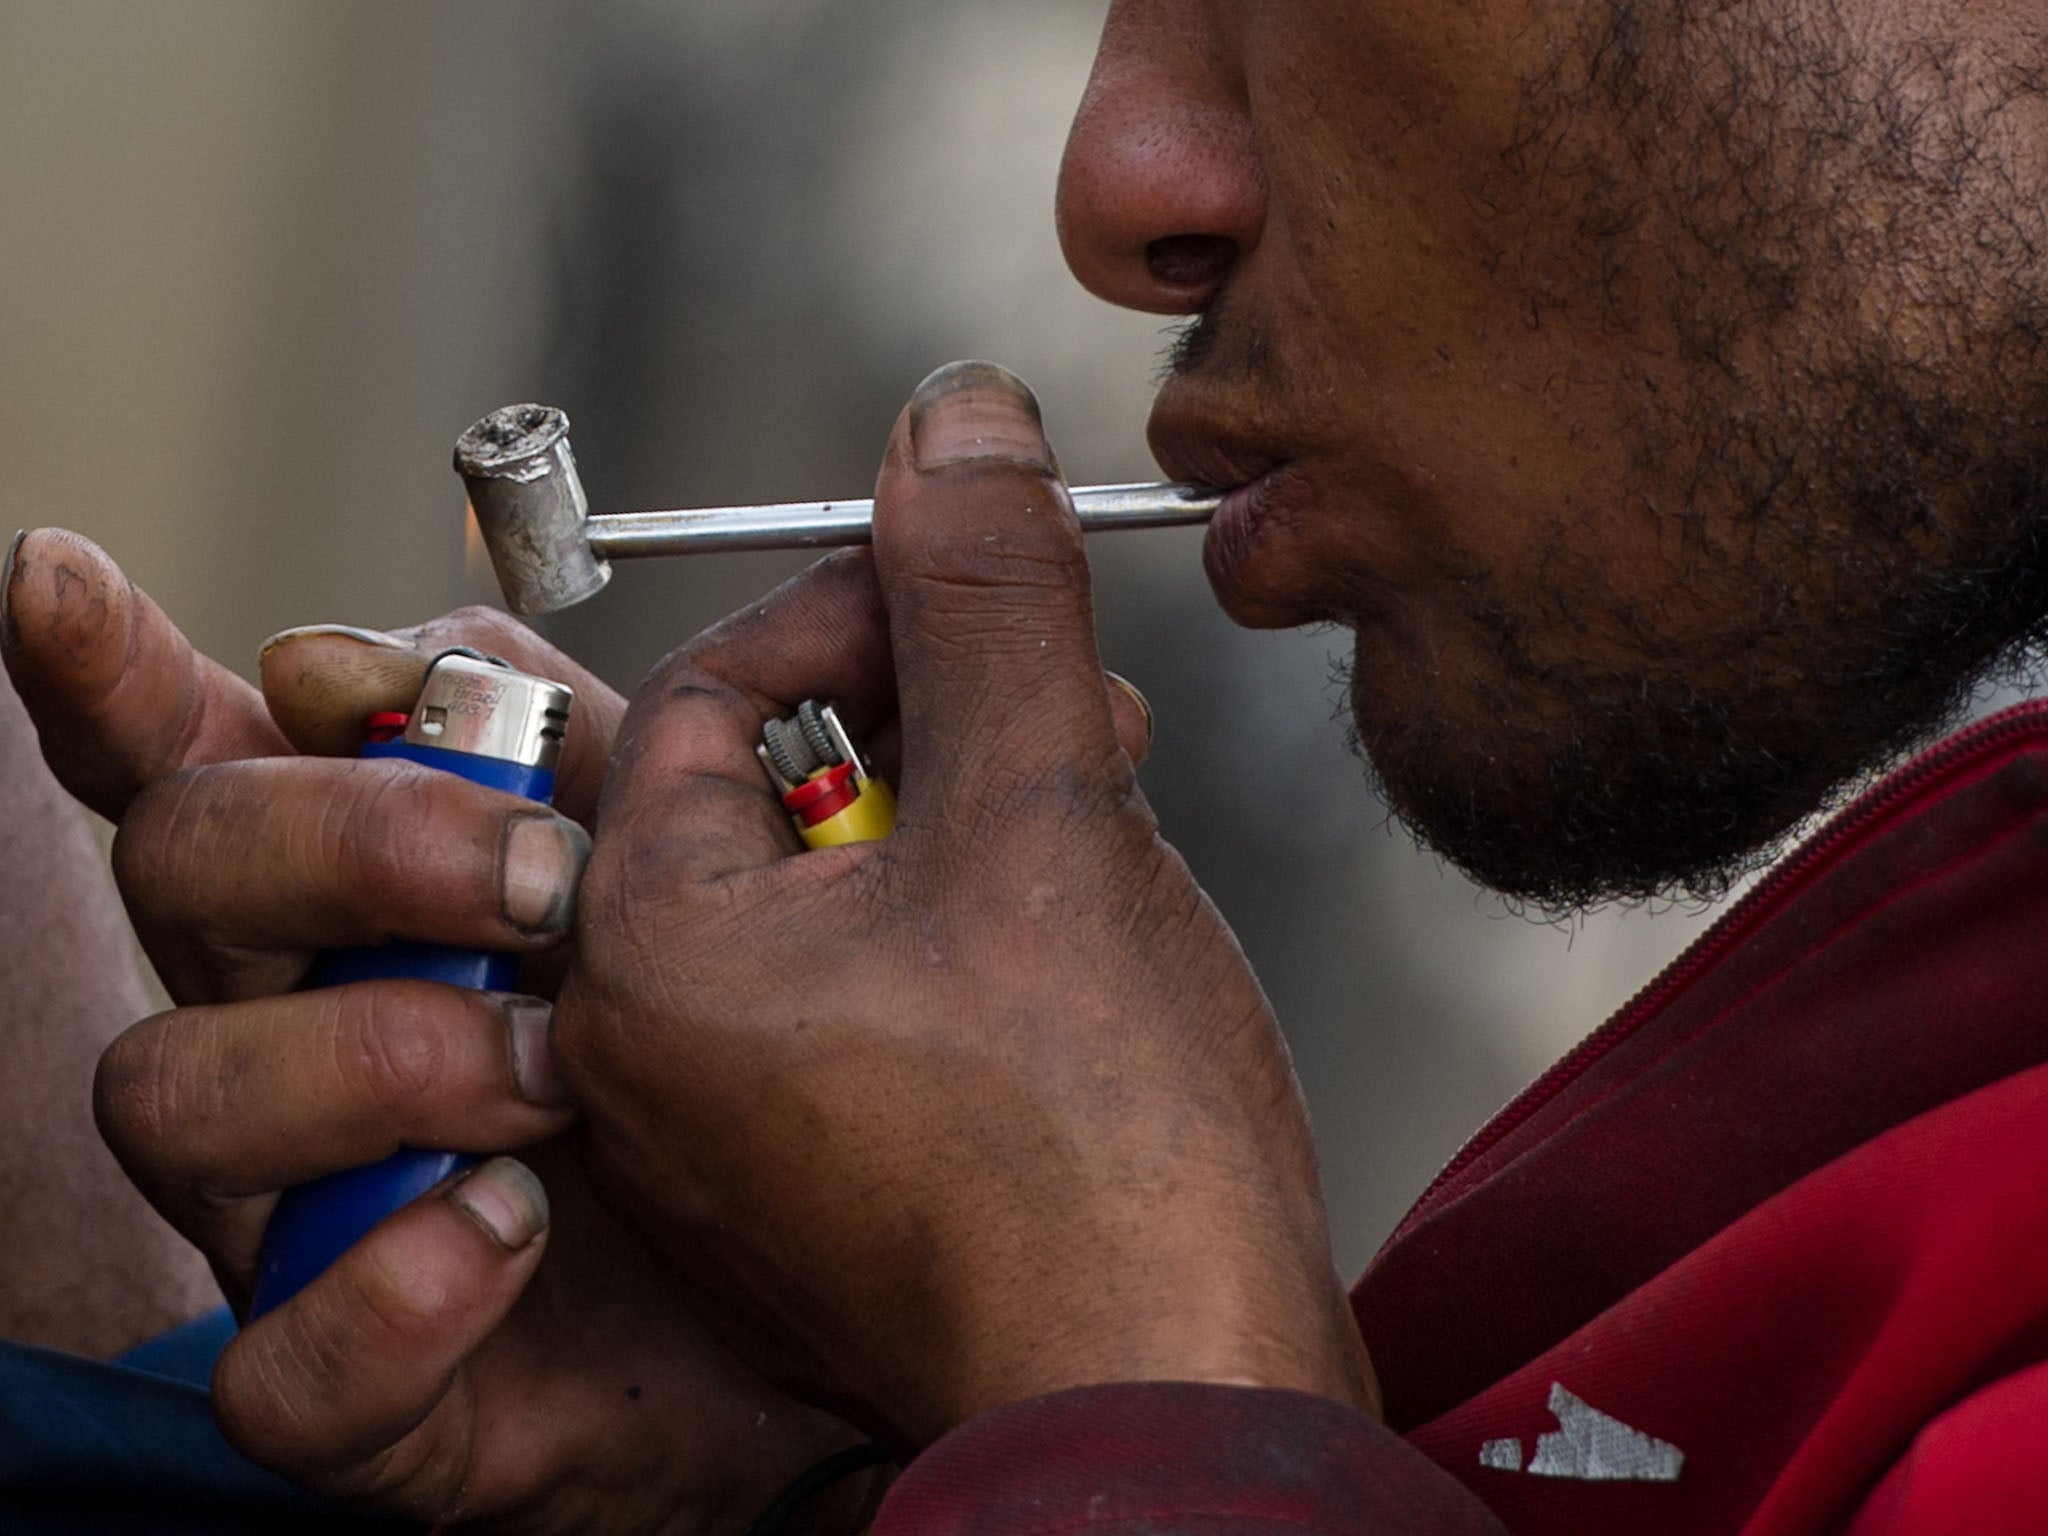 A drug addict smokes crack on the street in an area called 'Cracolandia' (Crackland in English), in downtown Sao Paulo, Brazil